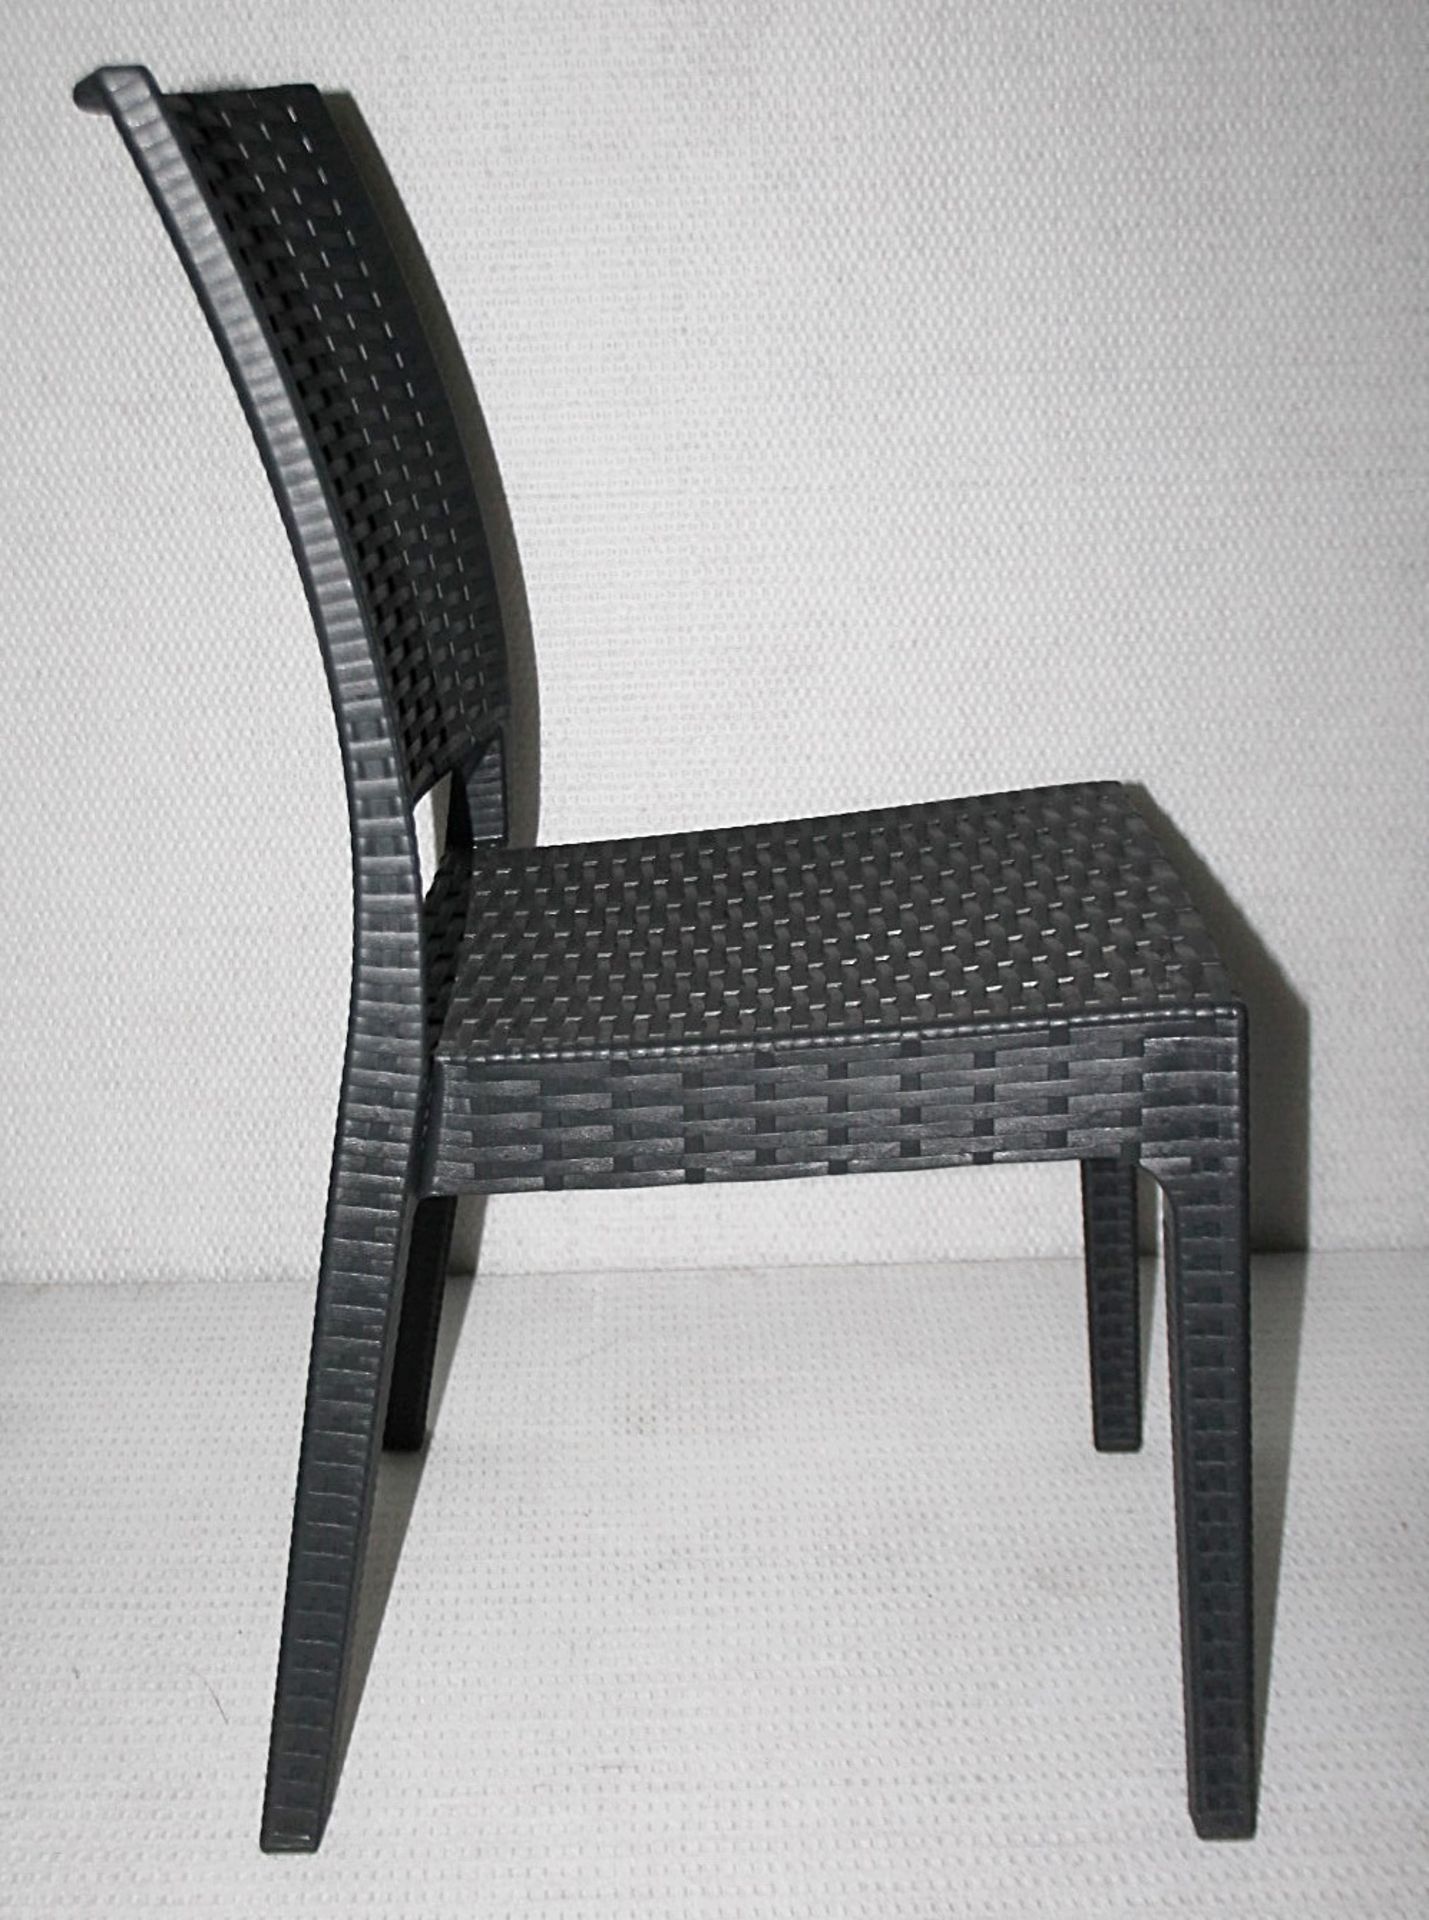 4 x Siesta 'Florida' Rattan Style Garden Chairs In Dark Grey - Suitable For Commercial or Home Use - - Image 7 of 14